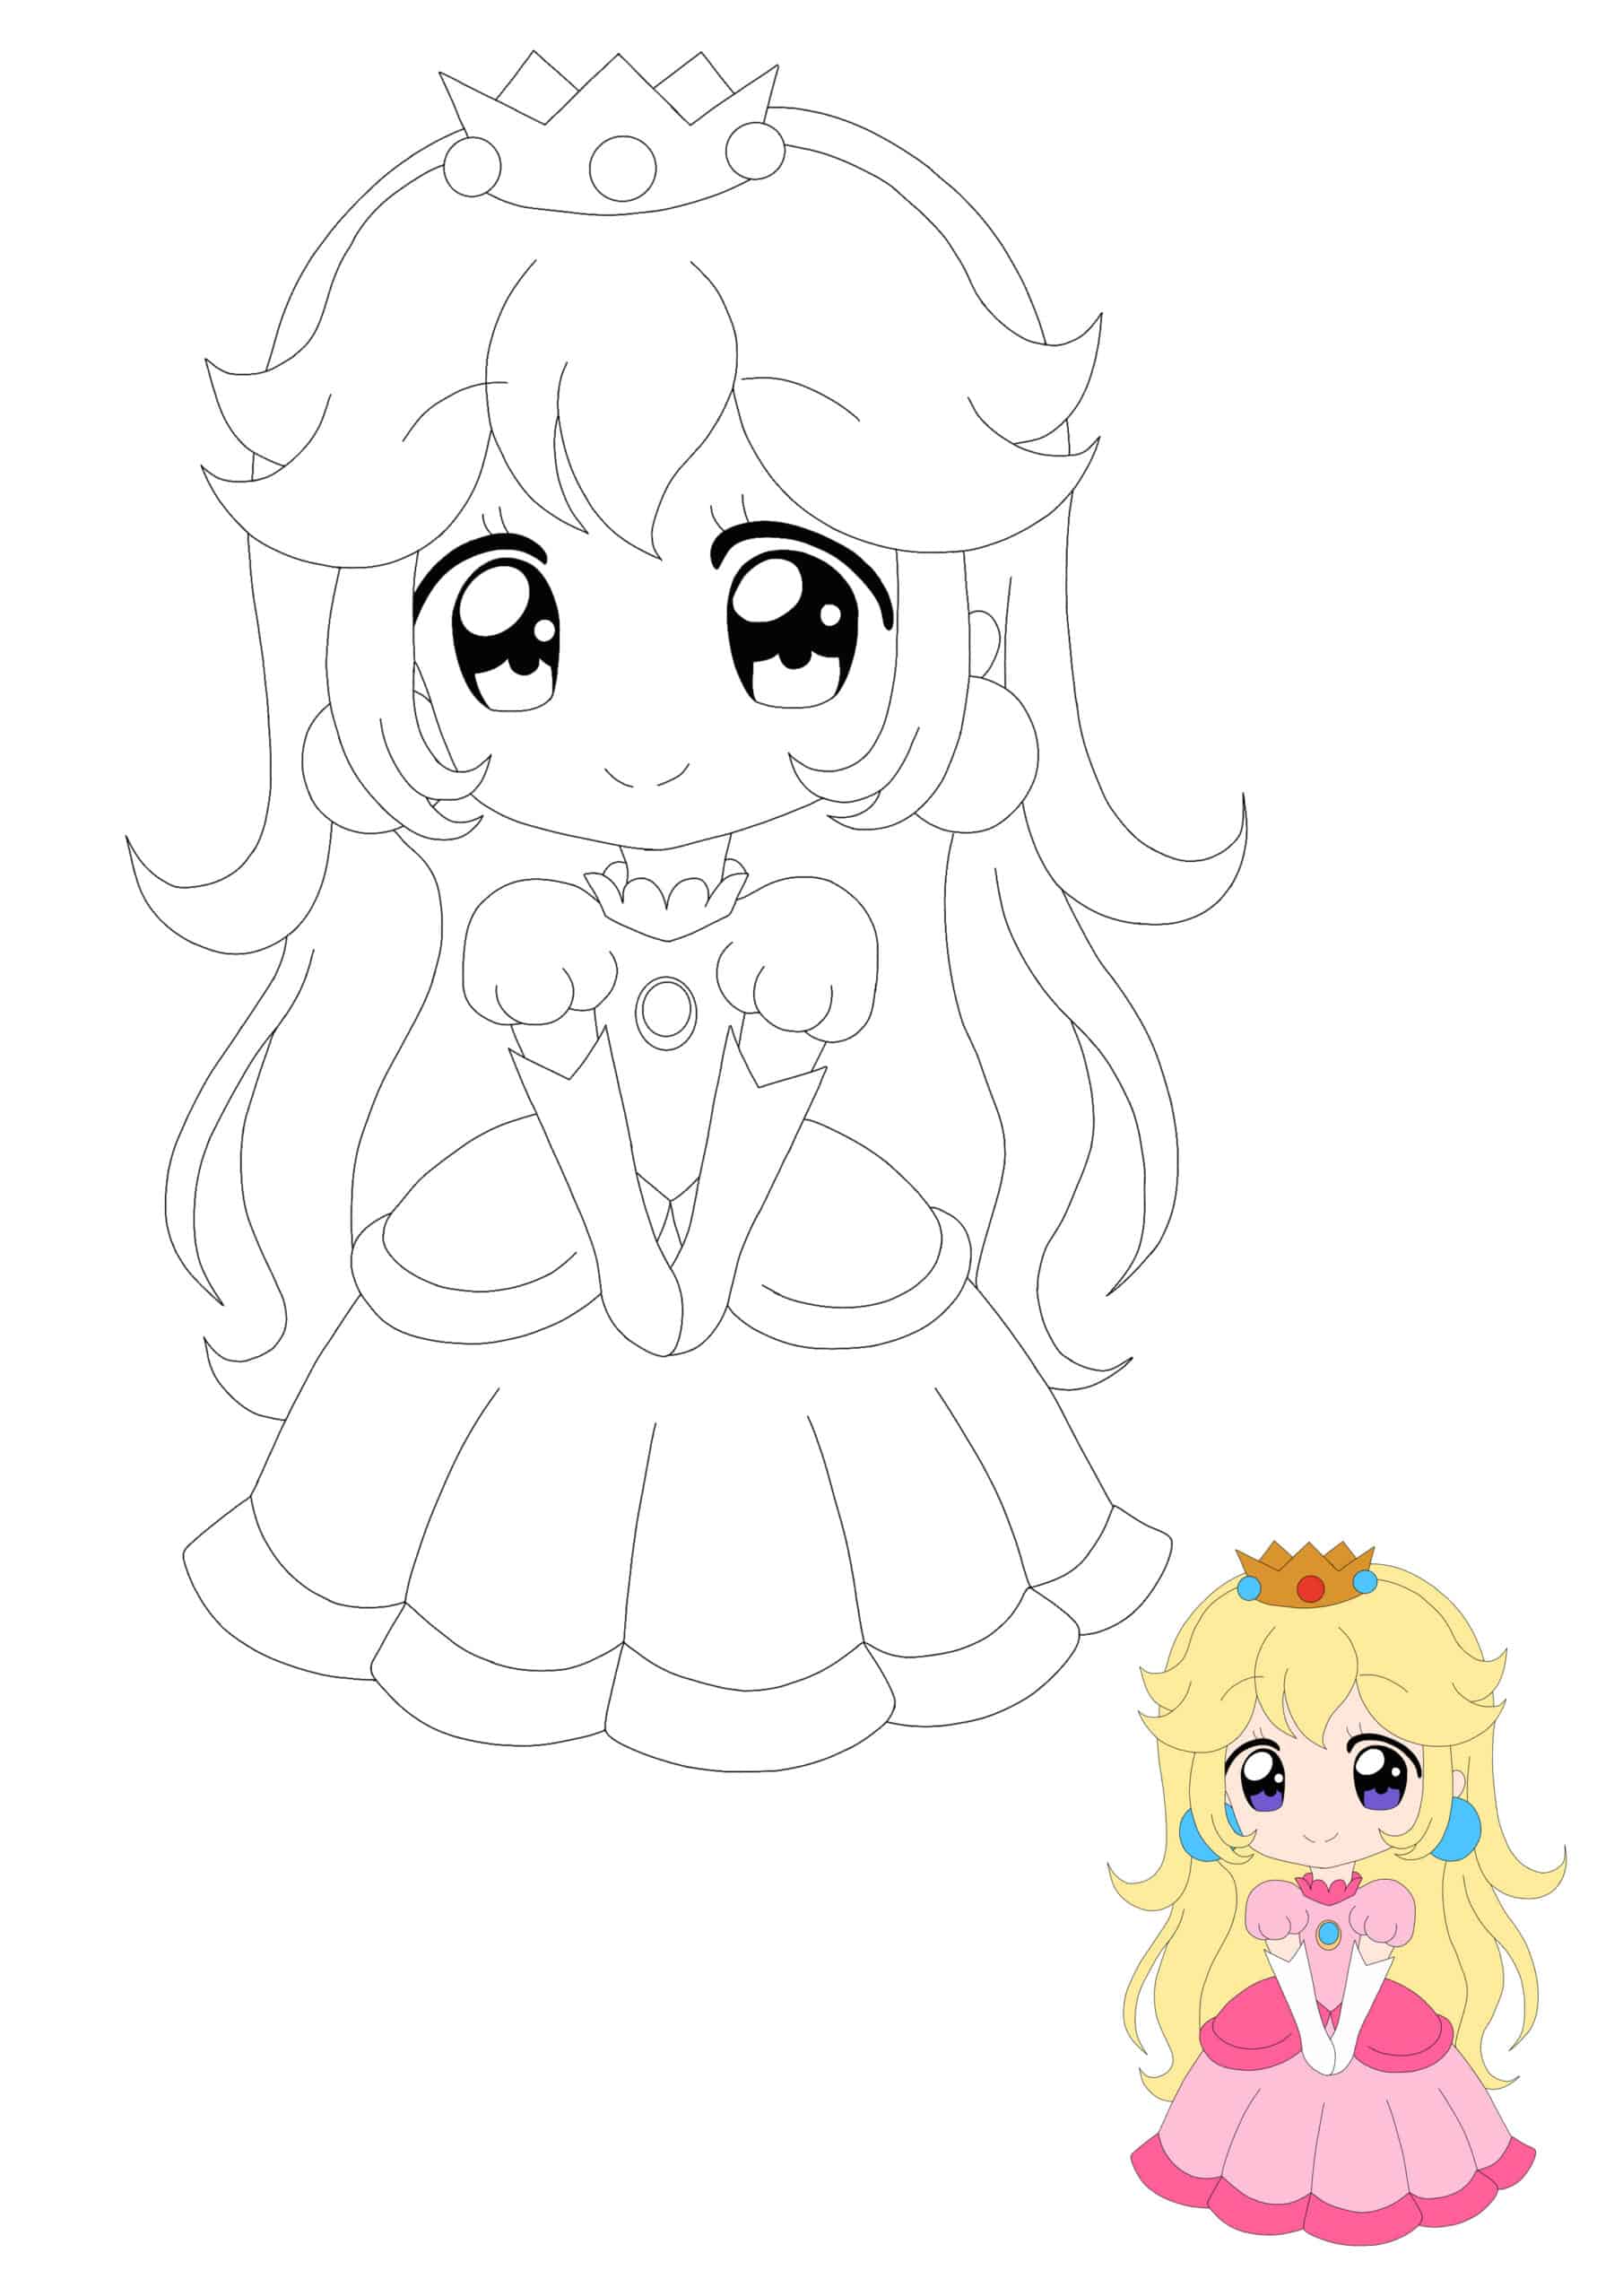 Princess Peach Anime Coloring Pages   Coloring Cool